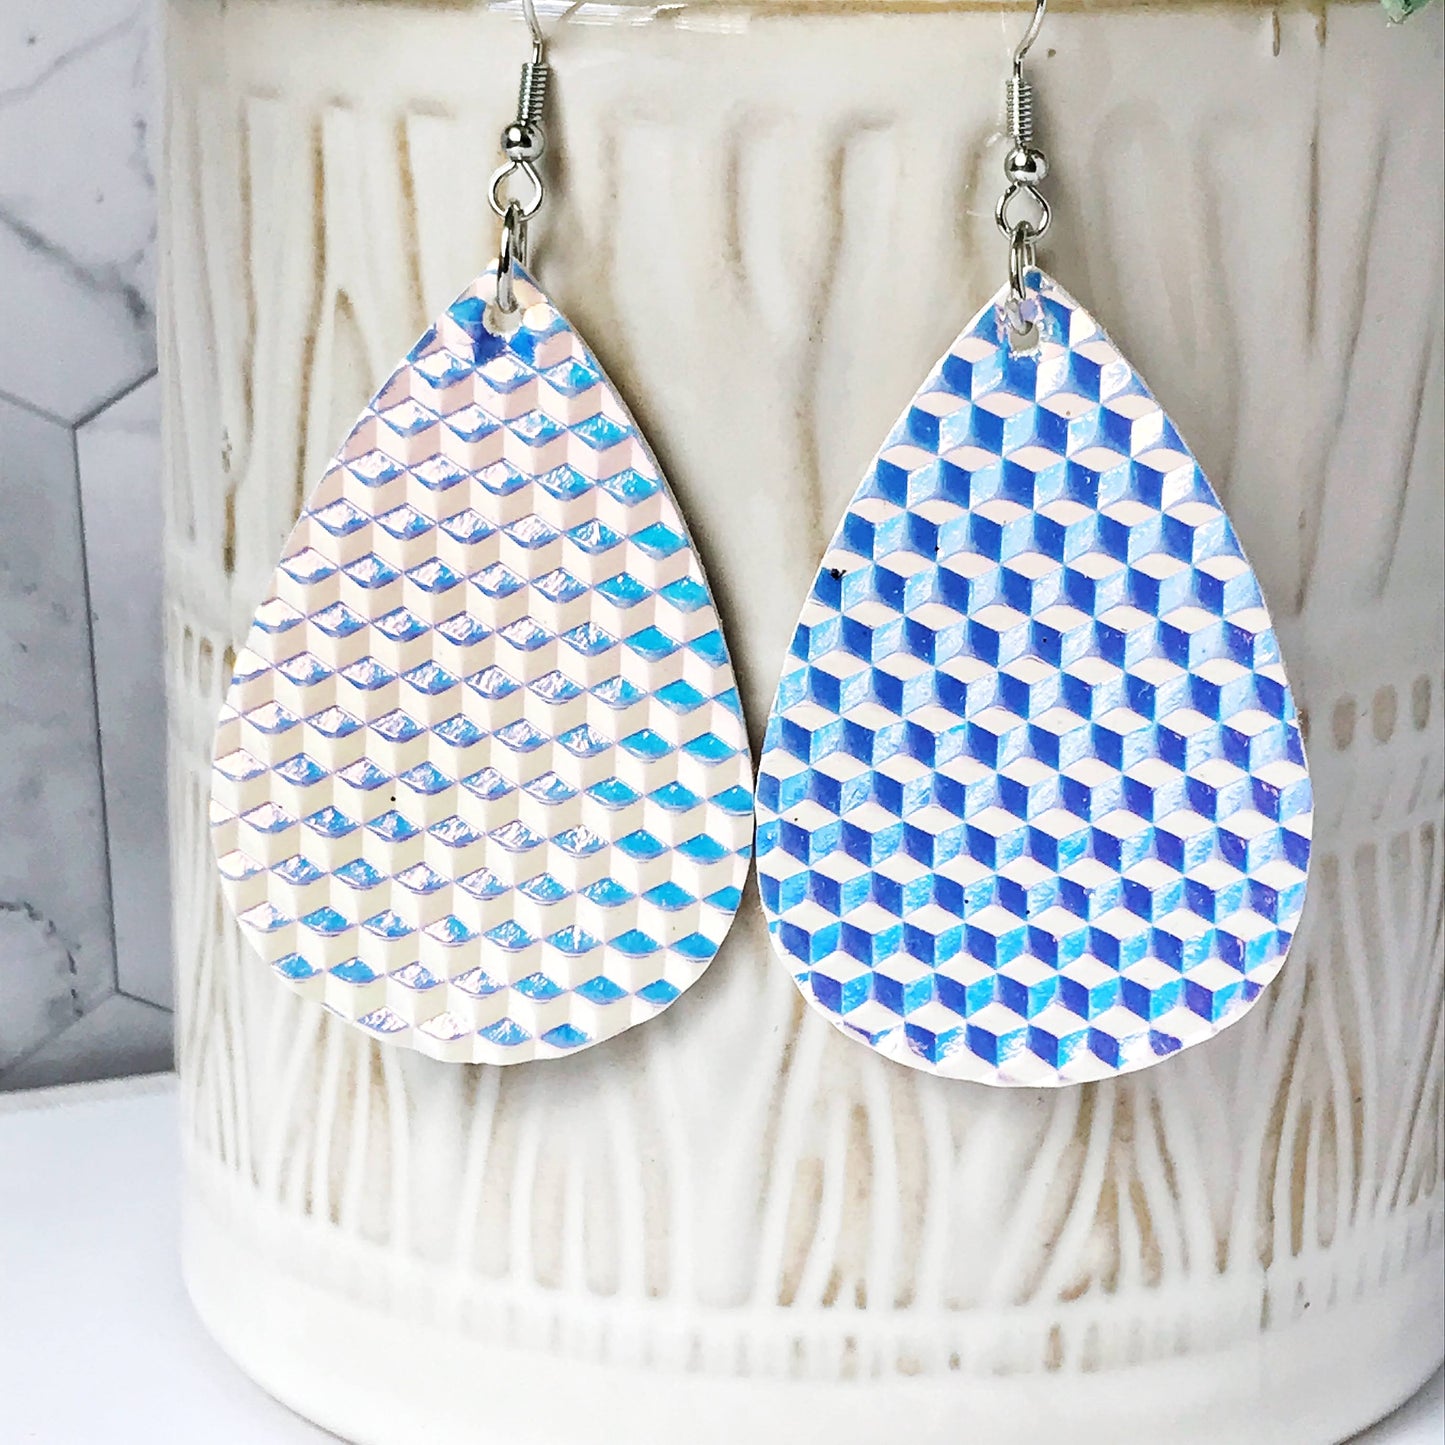 London - Irridescent White Faux Leather Earrings